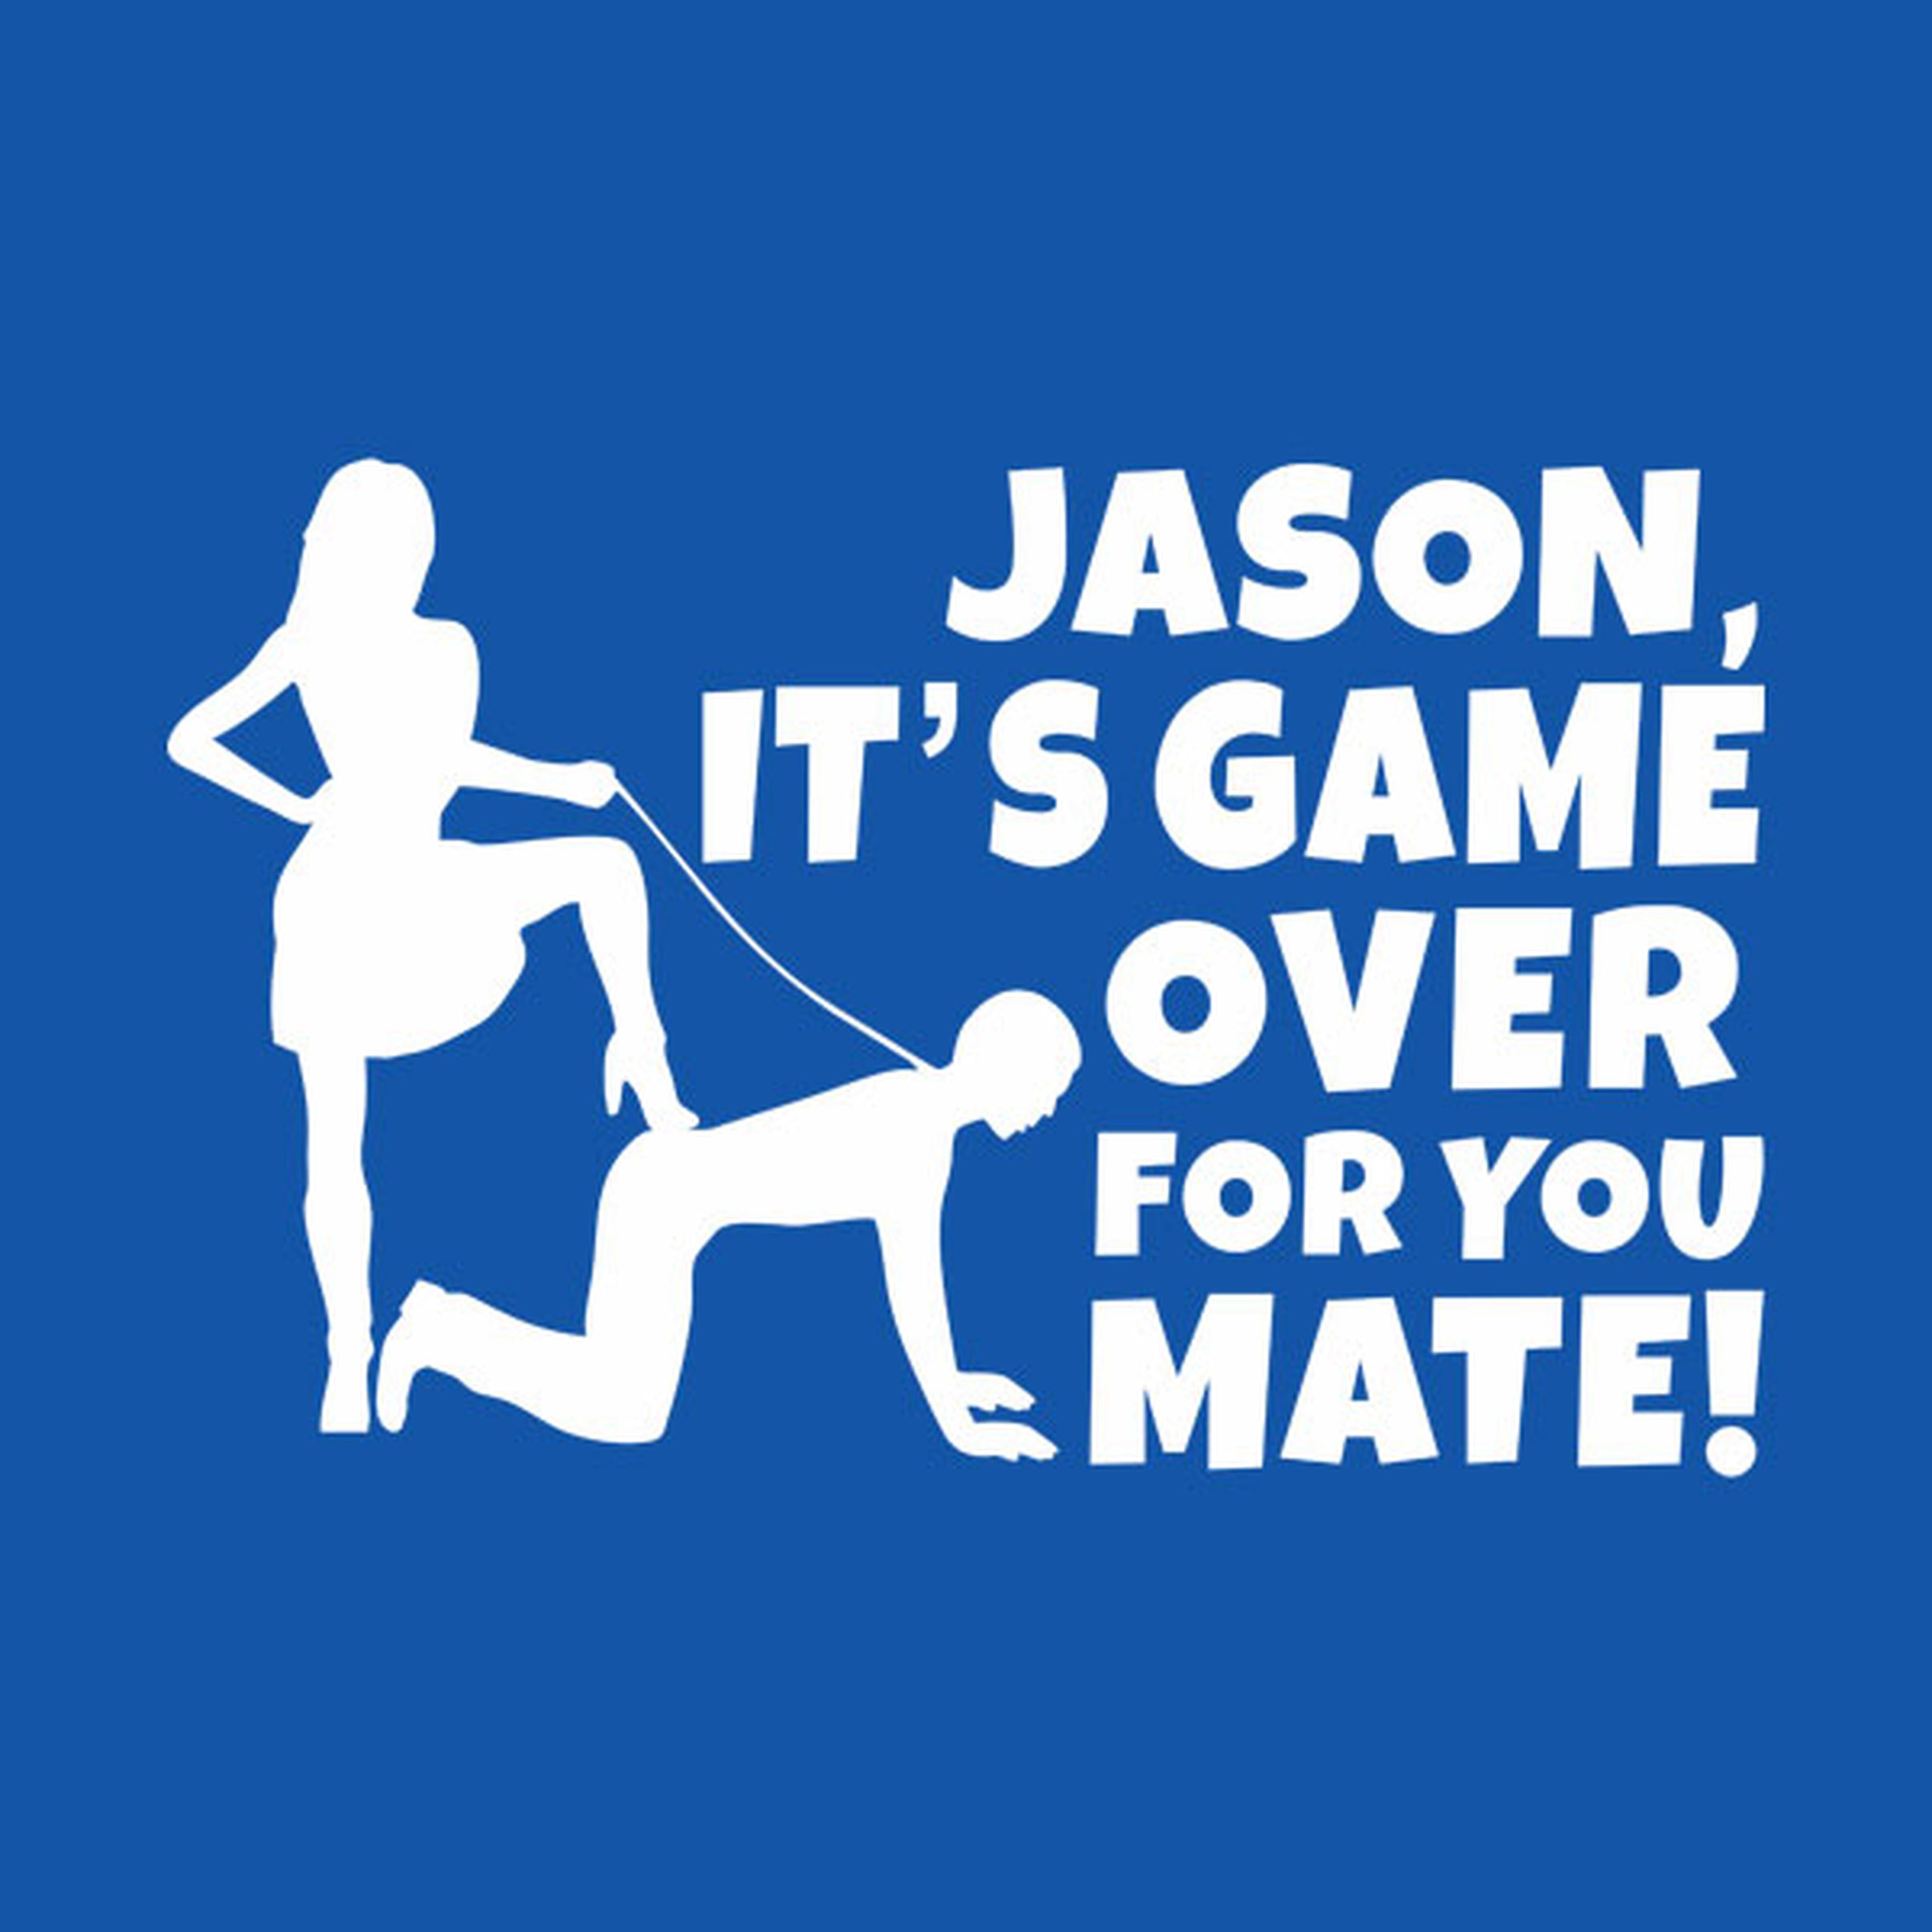 Game over mate - T-shirt